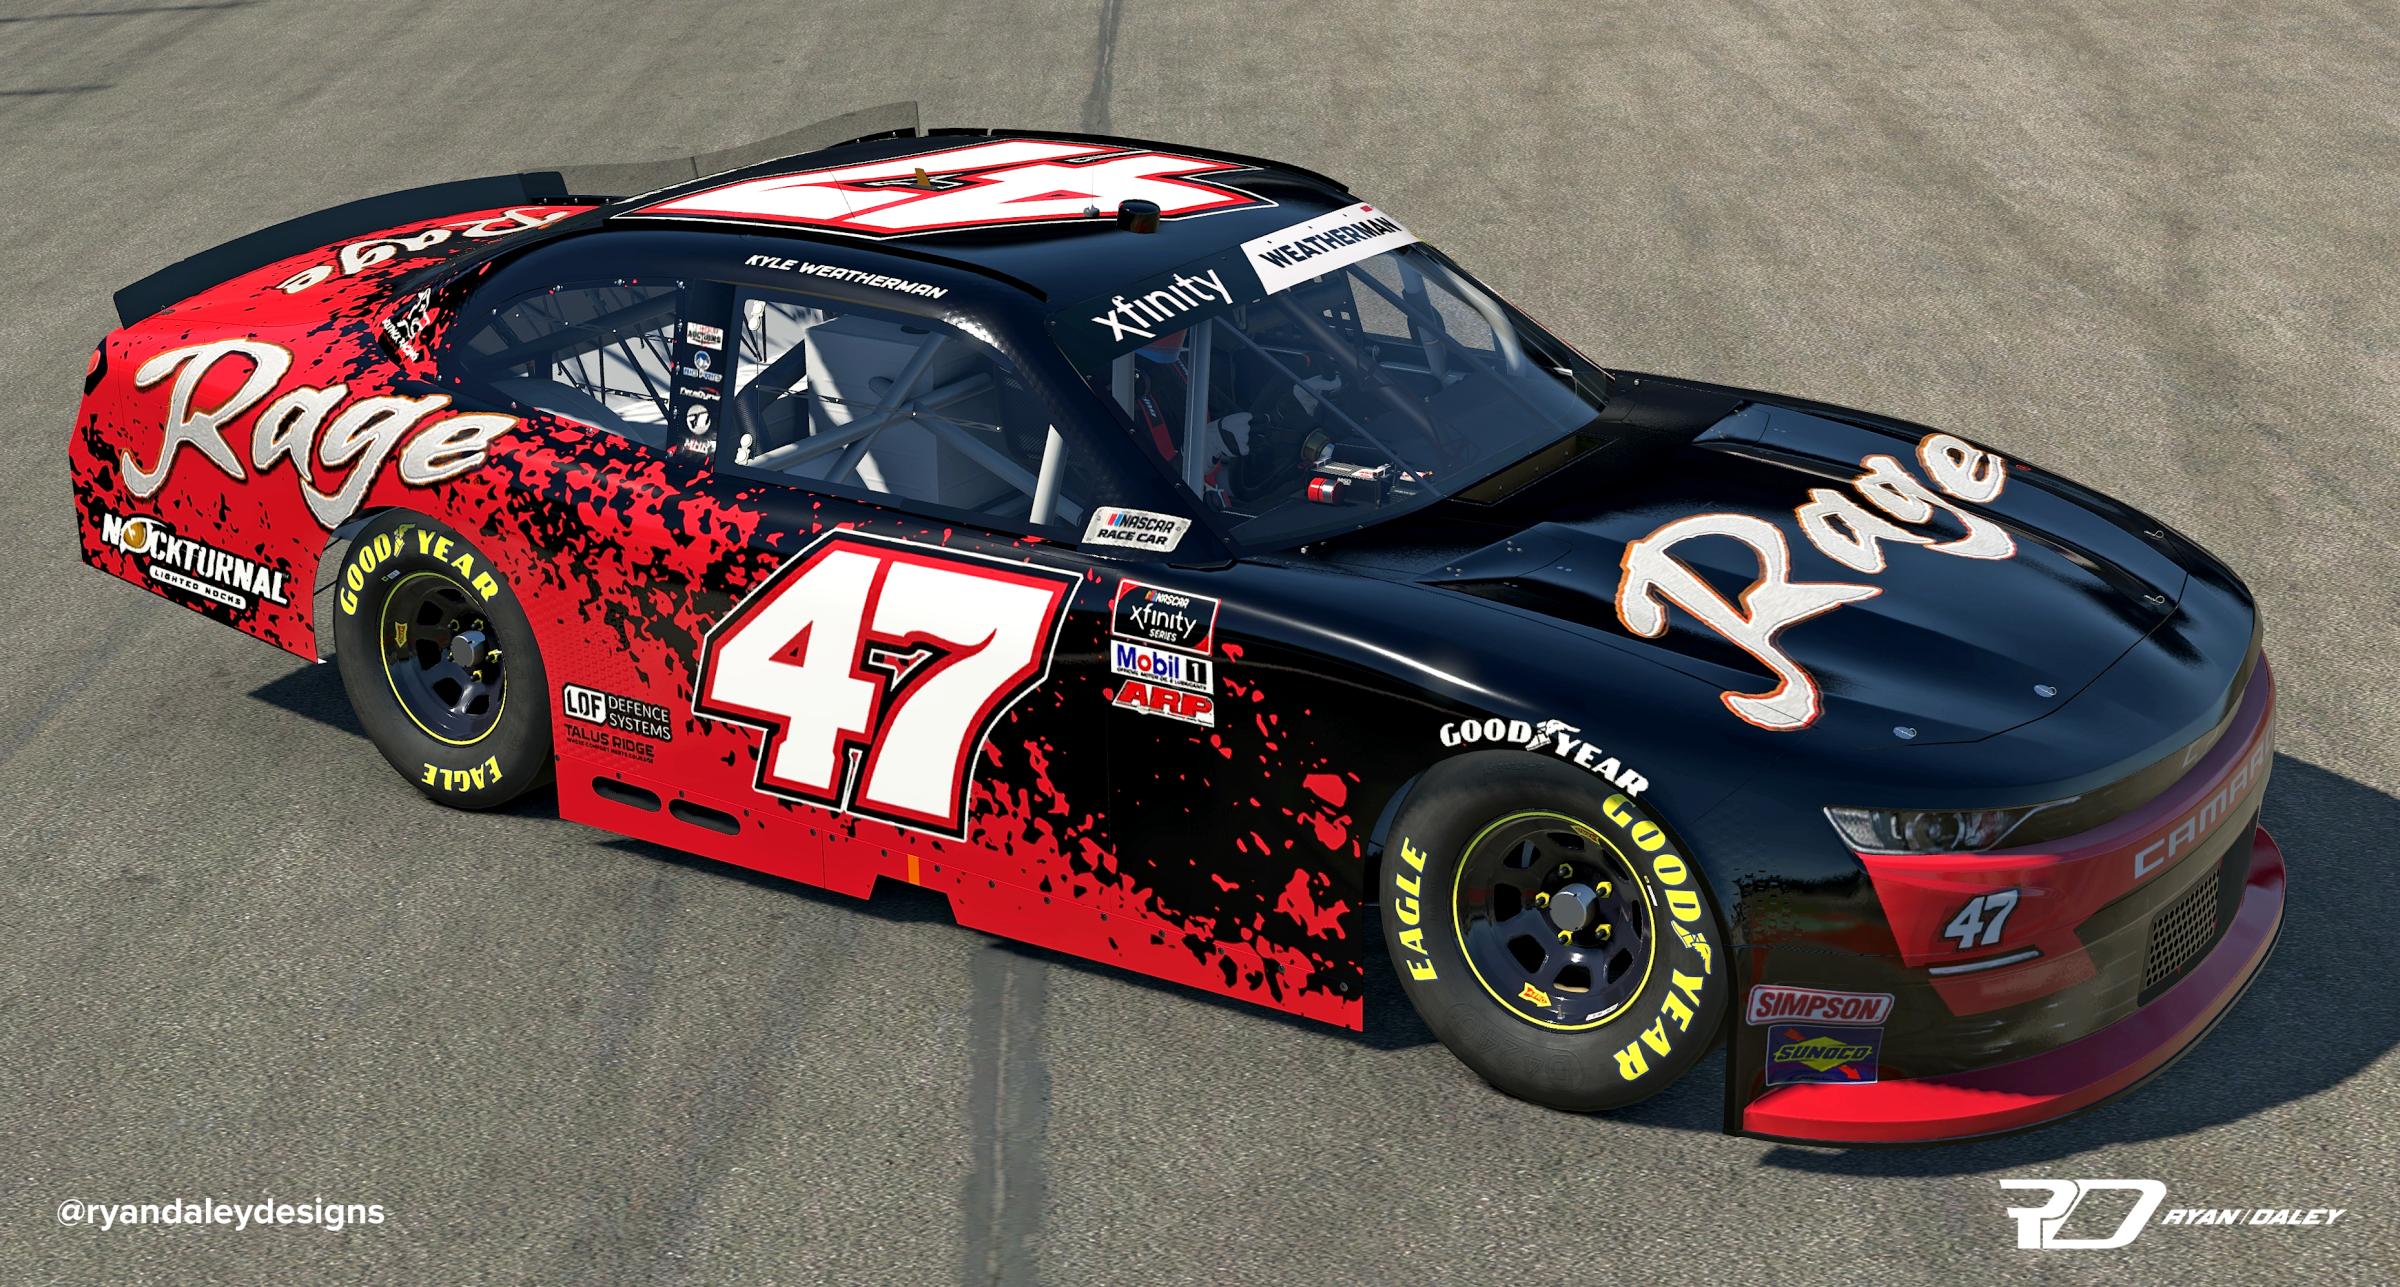 Preview of Official 2021 #47 Kyle Weatherman Rage No Numbers by Ryan Daley